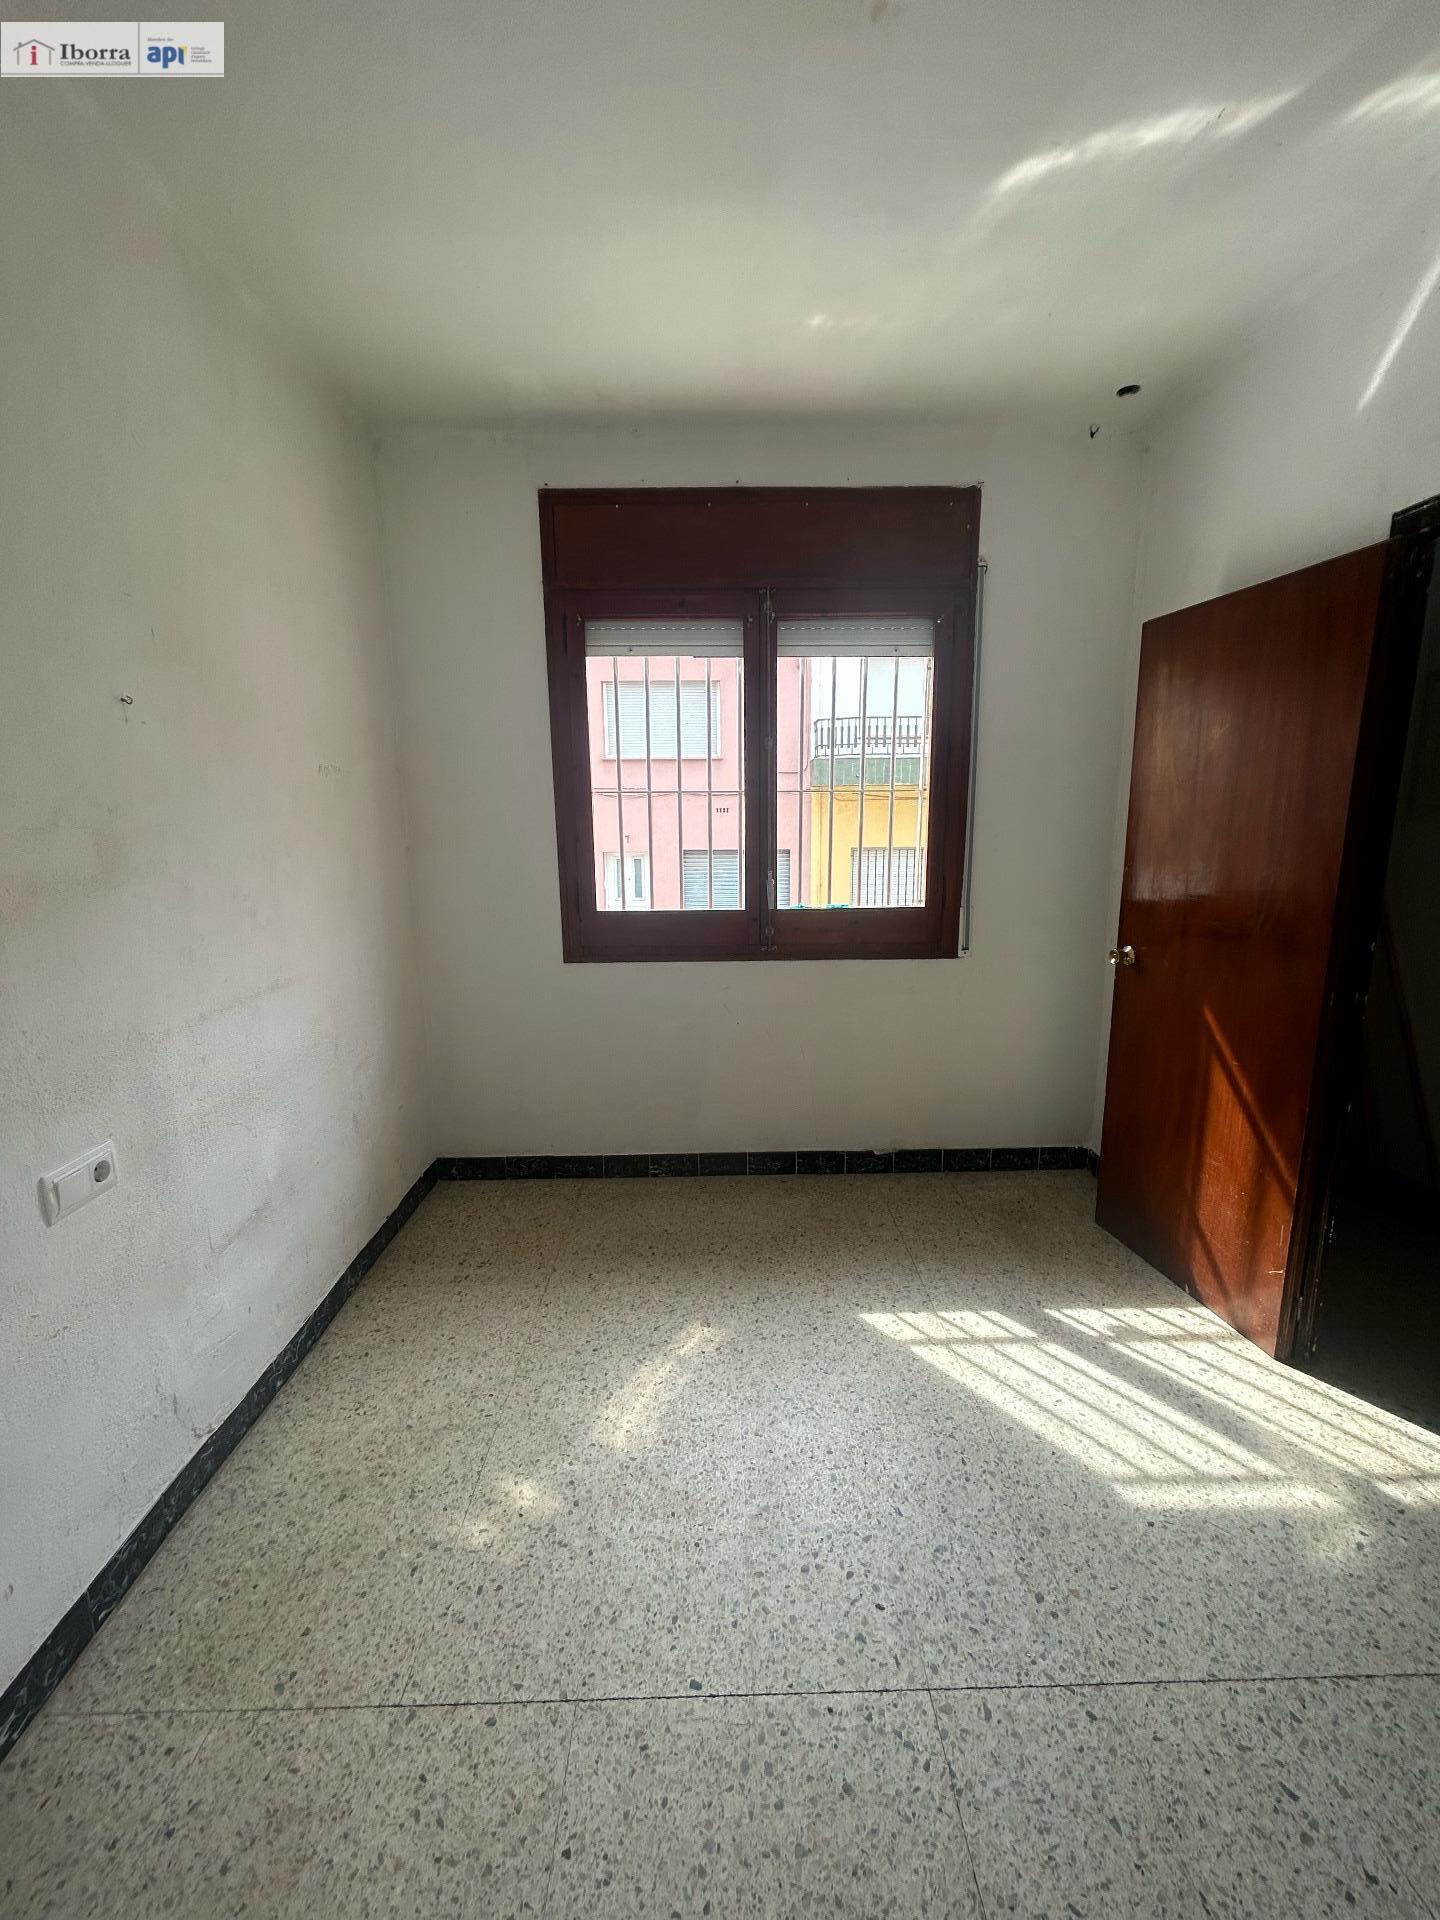 House For sale Tordera